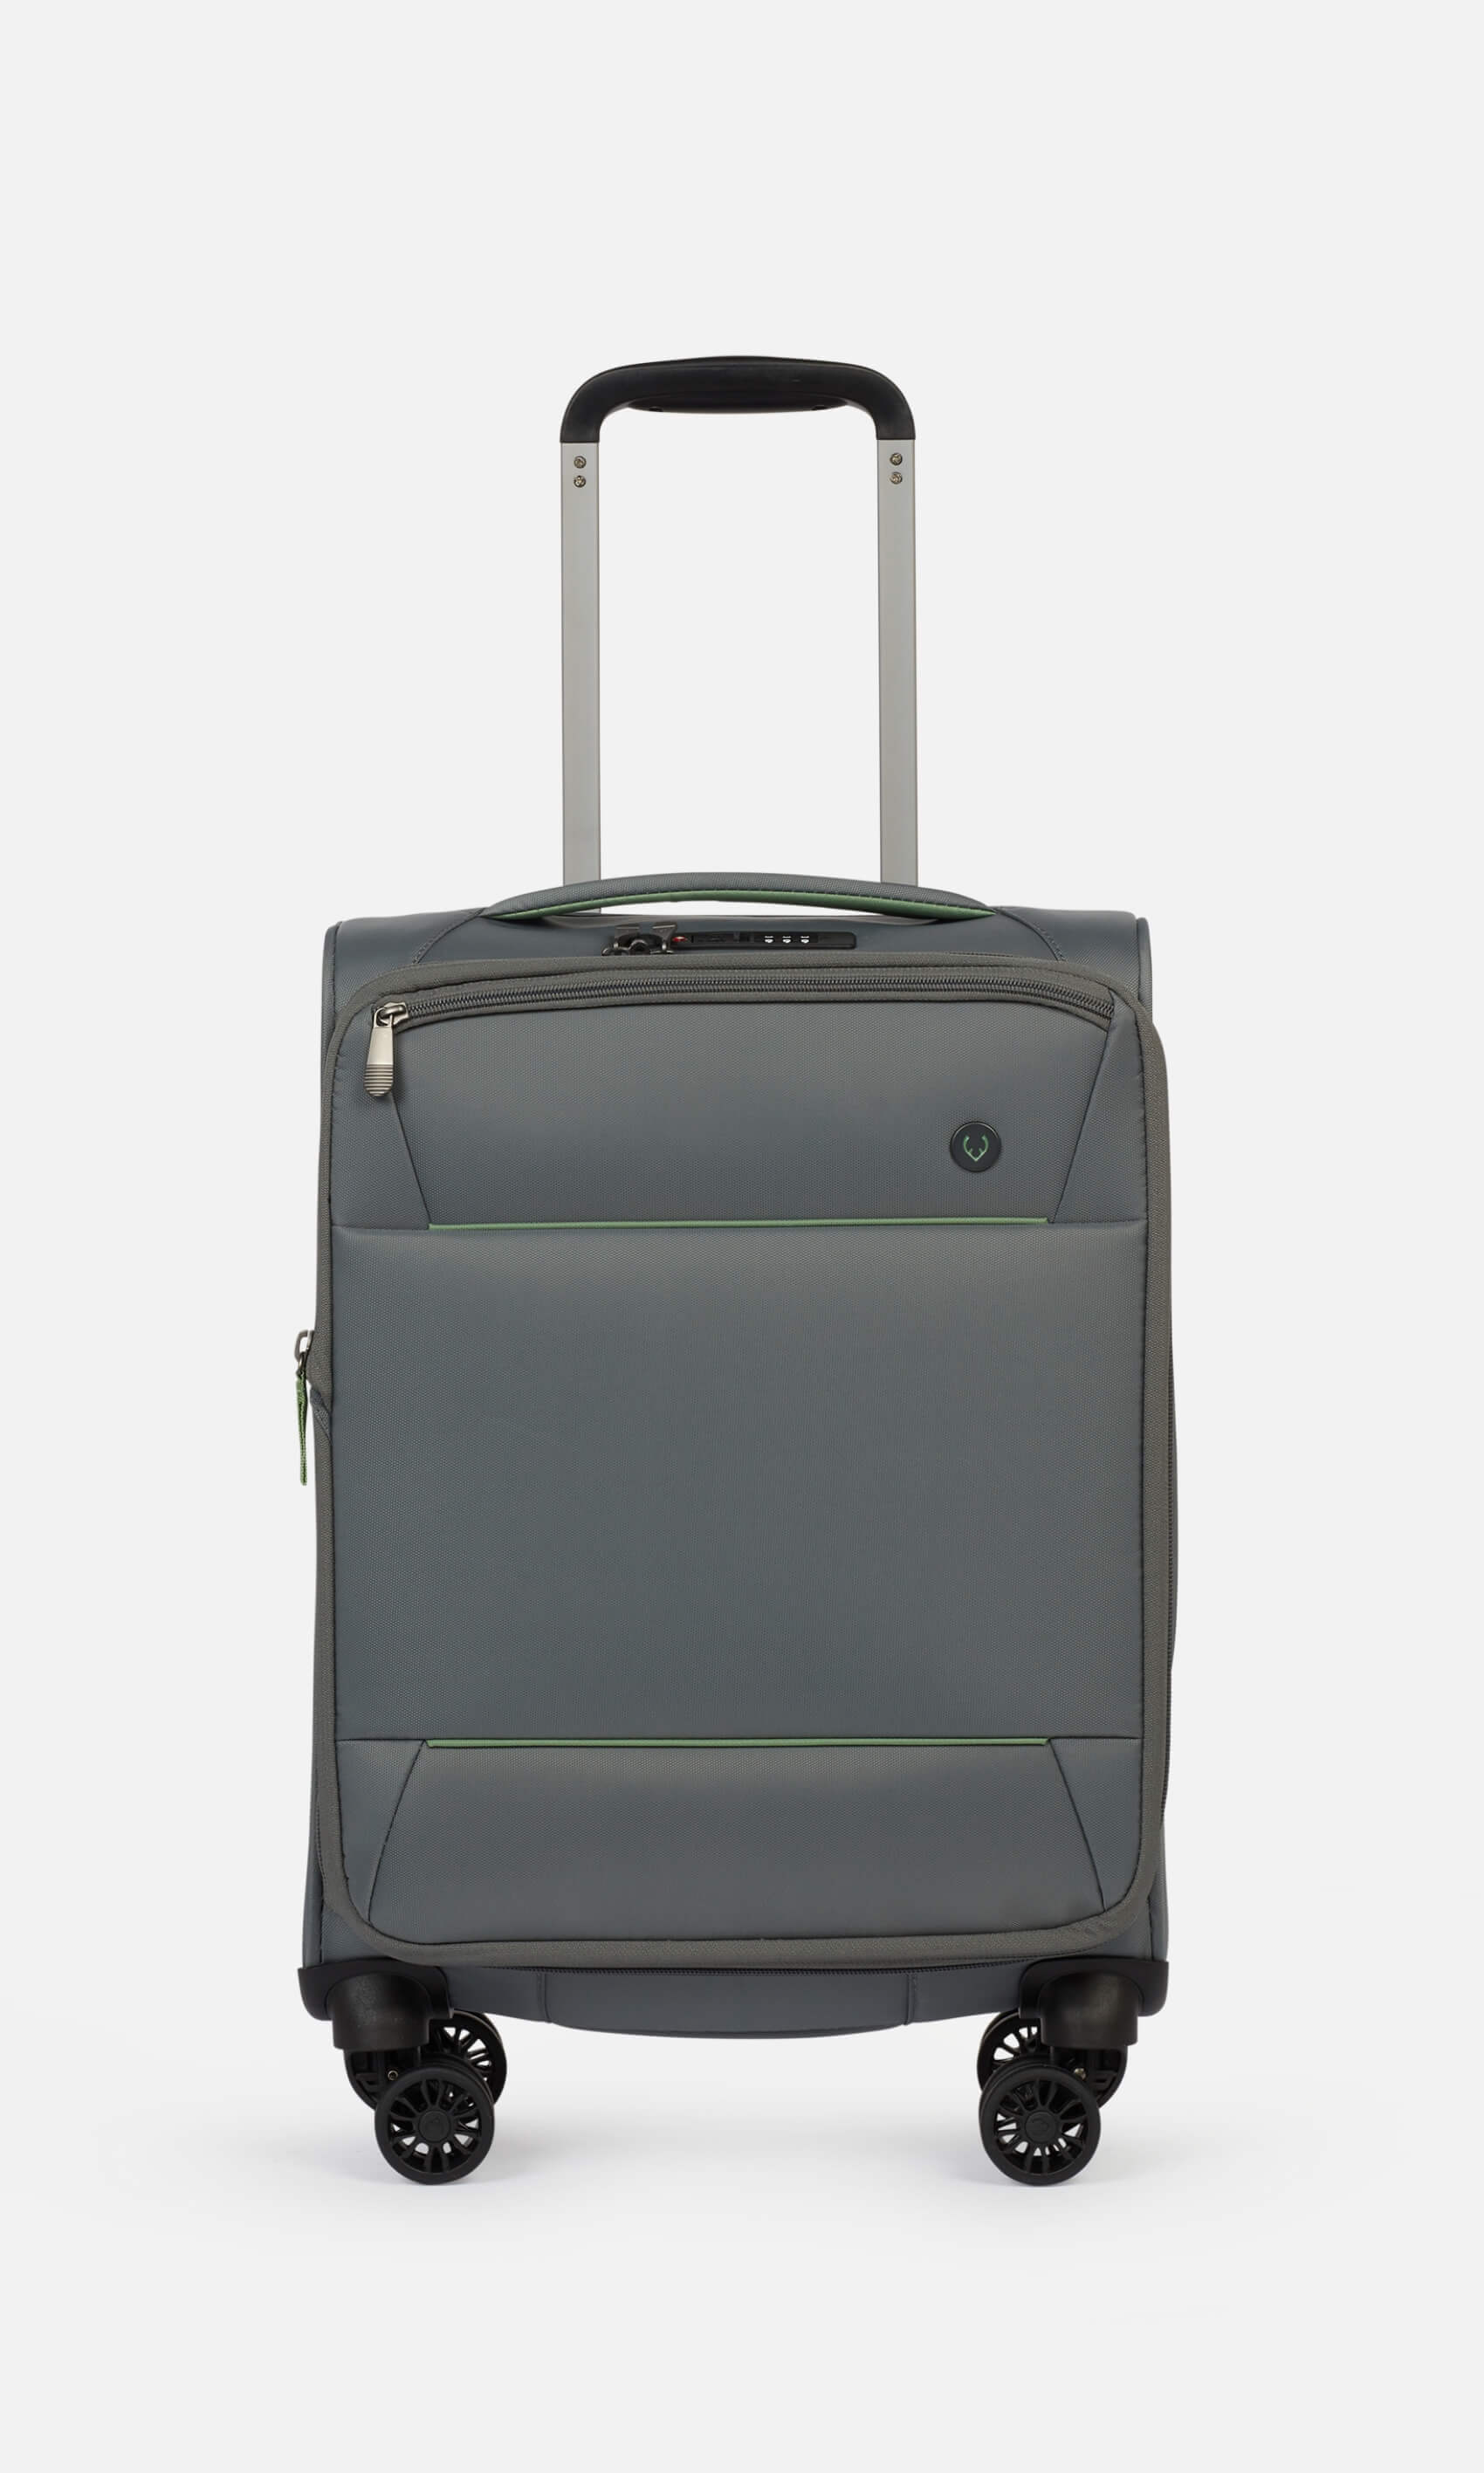 Antler Luggage -  Brixham set in concrete grey - Soft Suitcases Prestwick Set of 3 Suitcases Grey | Soft Suitcases | Antler 